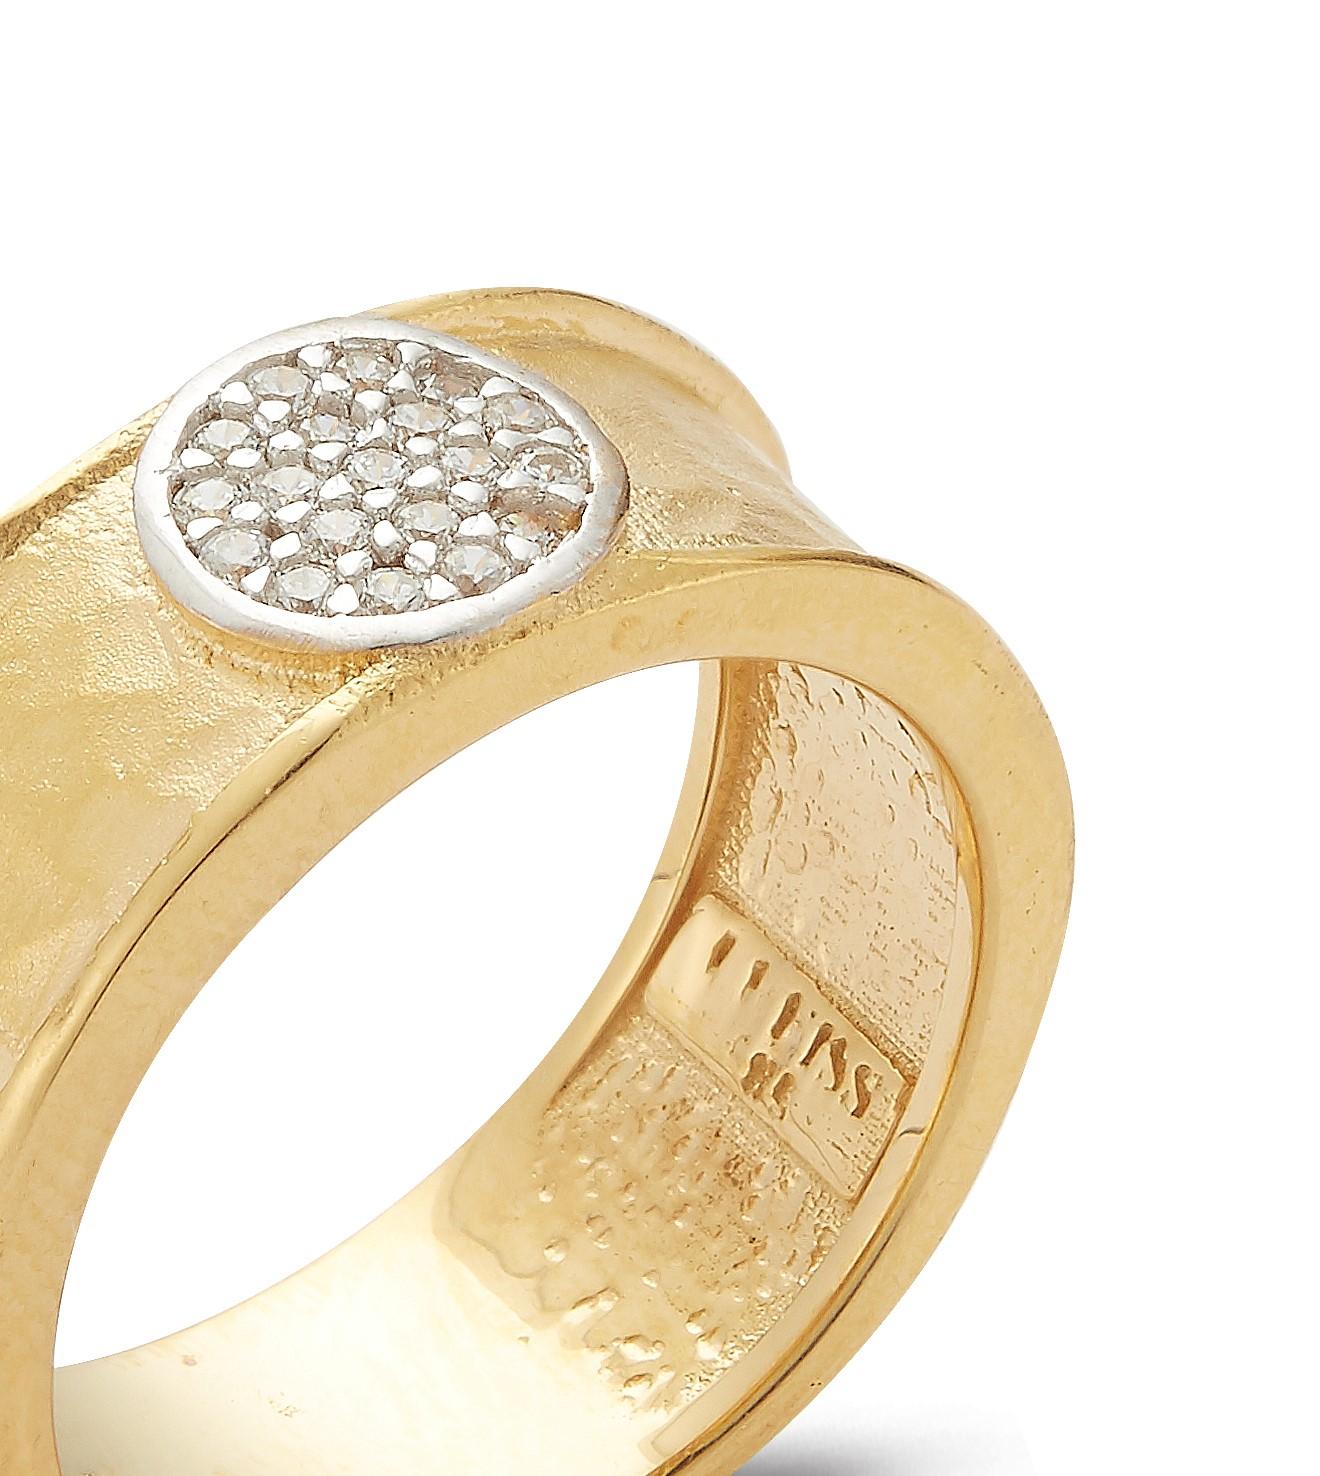 For Sale:  Hand-Crafted 14 Karat Yellow Gold Ring with a Diamond Circle Motif 4